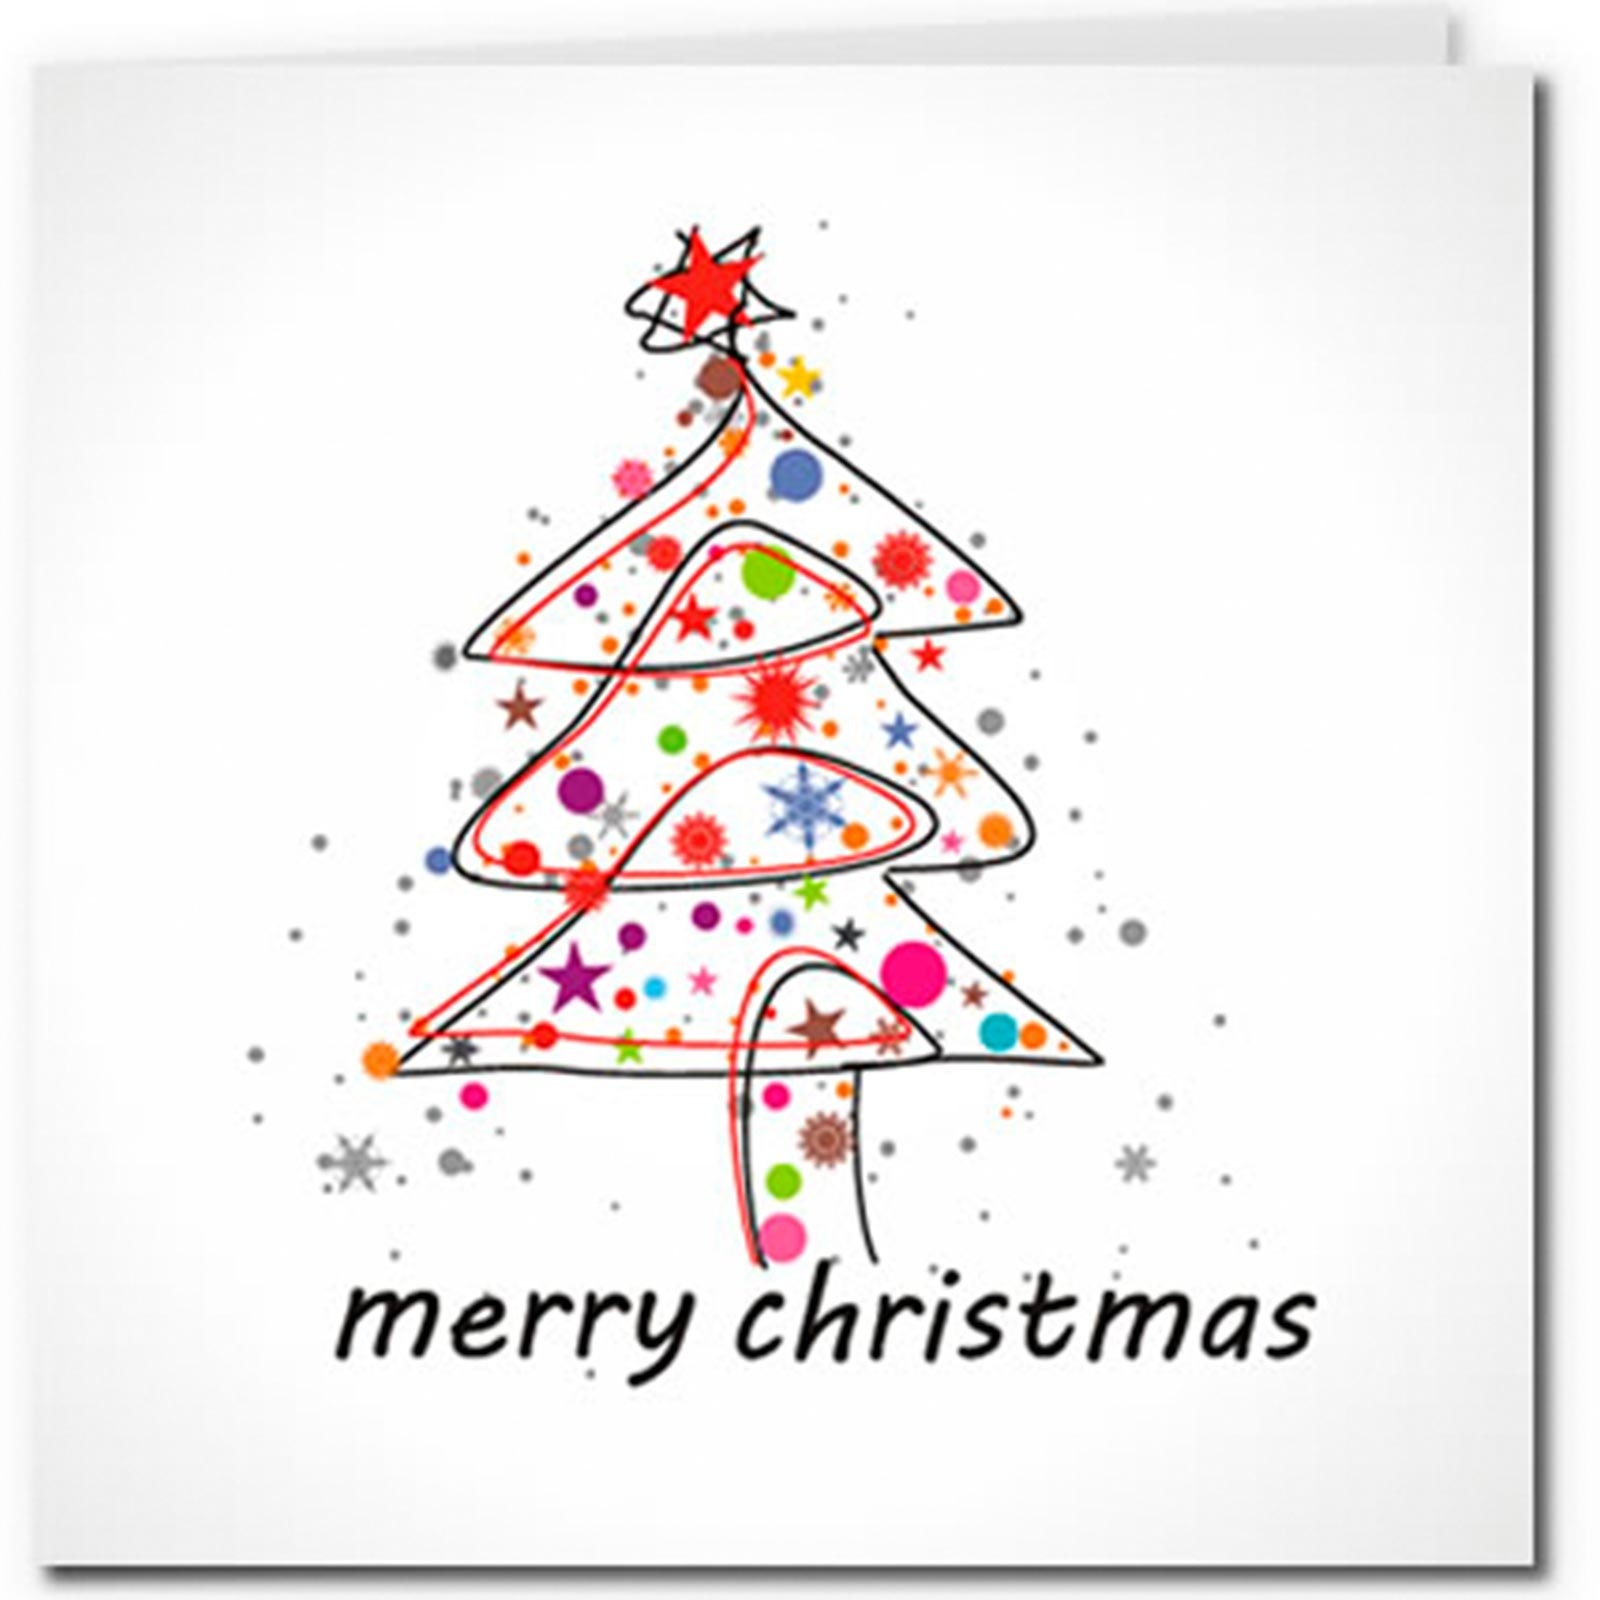 Free Christmas Cards To Print Out And Send This Year | Reader&amp;#039;s Digest - Free Printable Xmas Cards